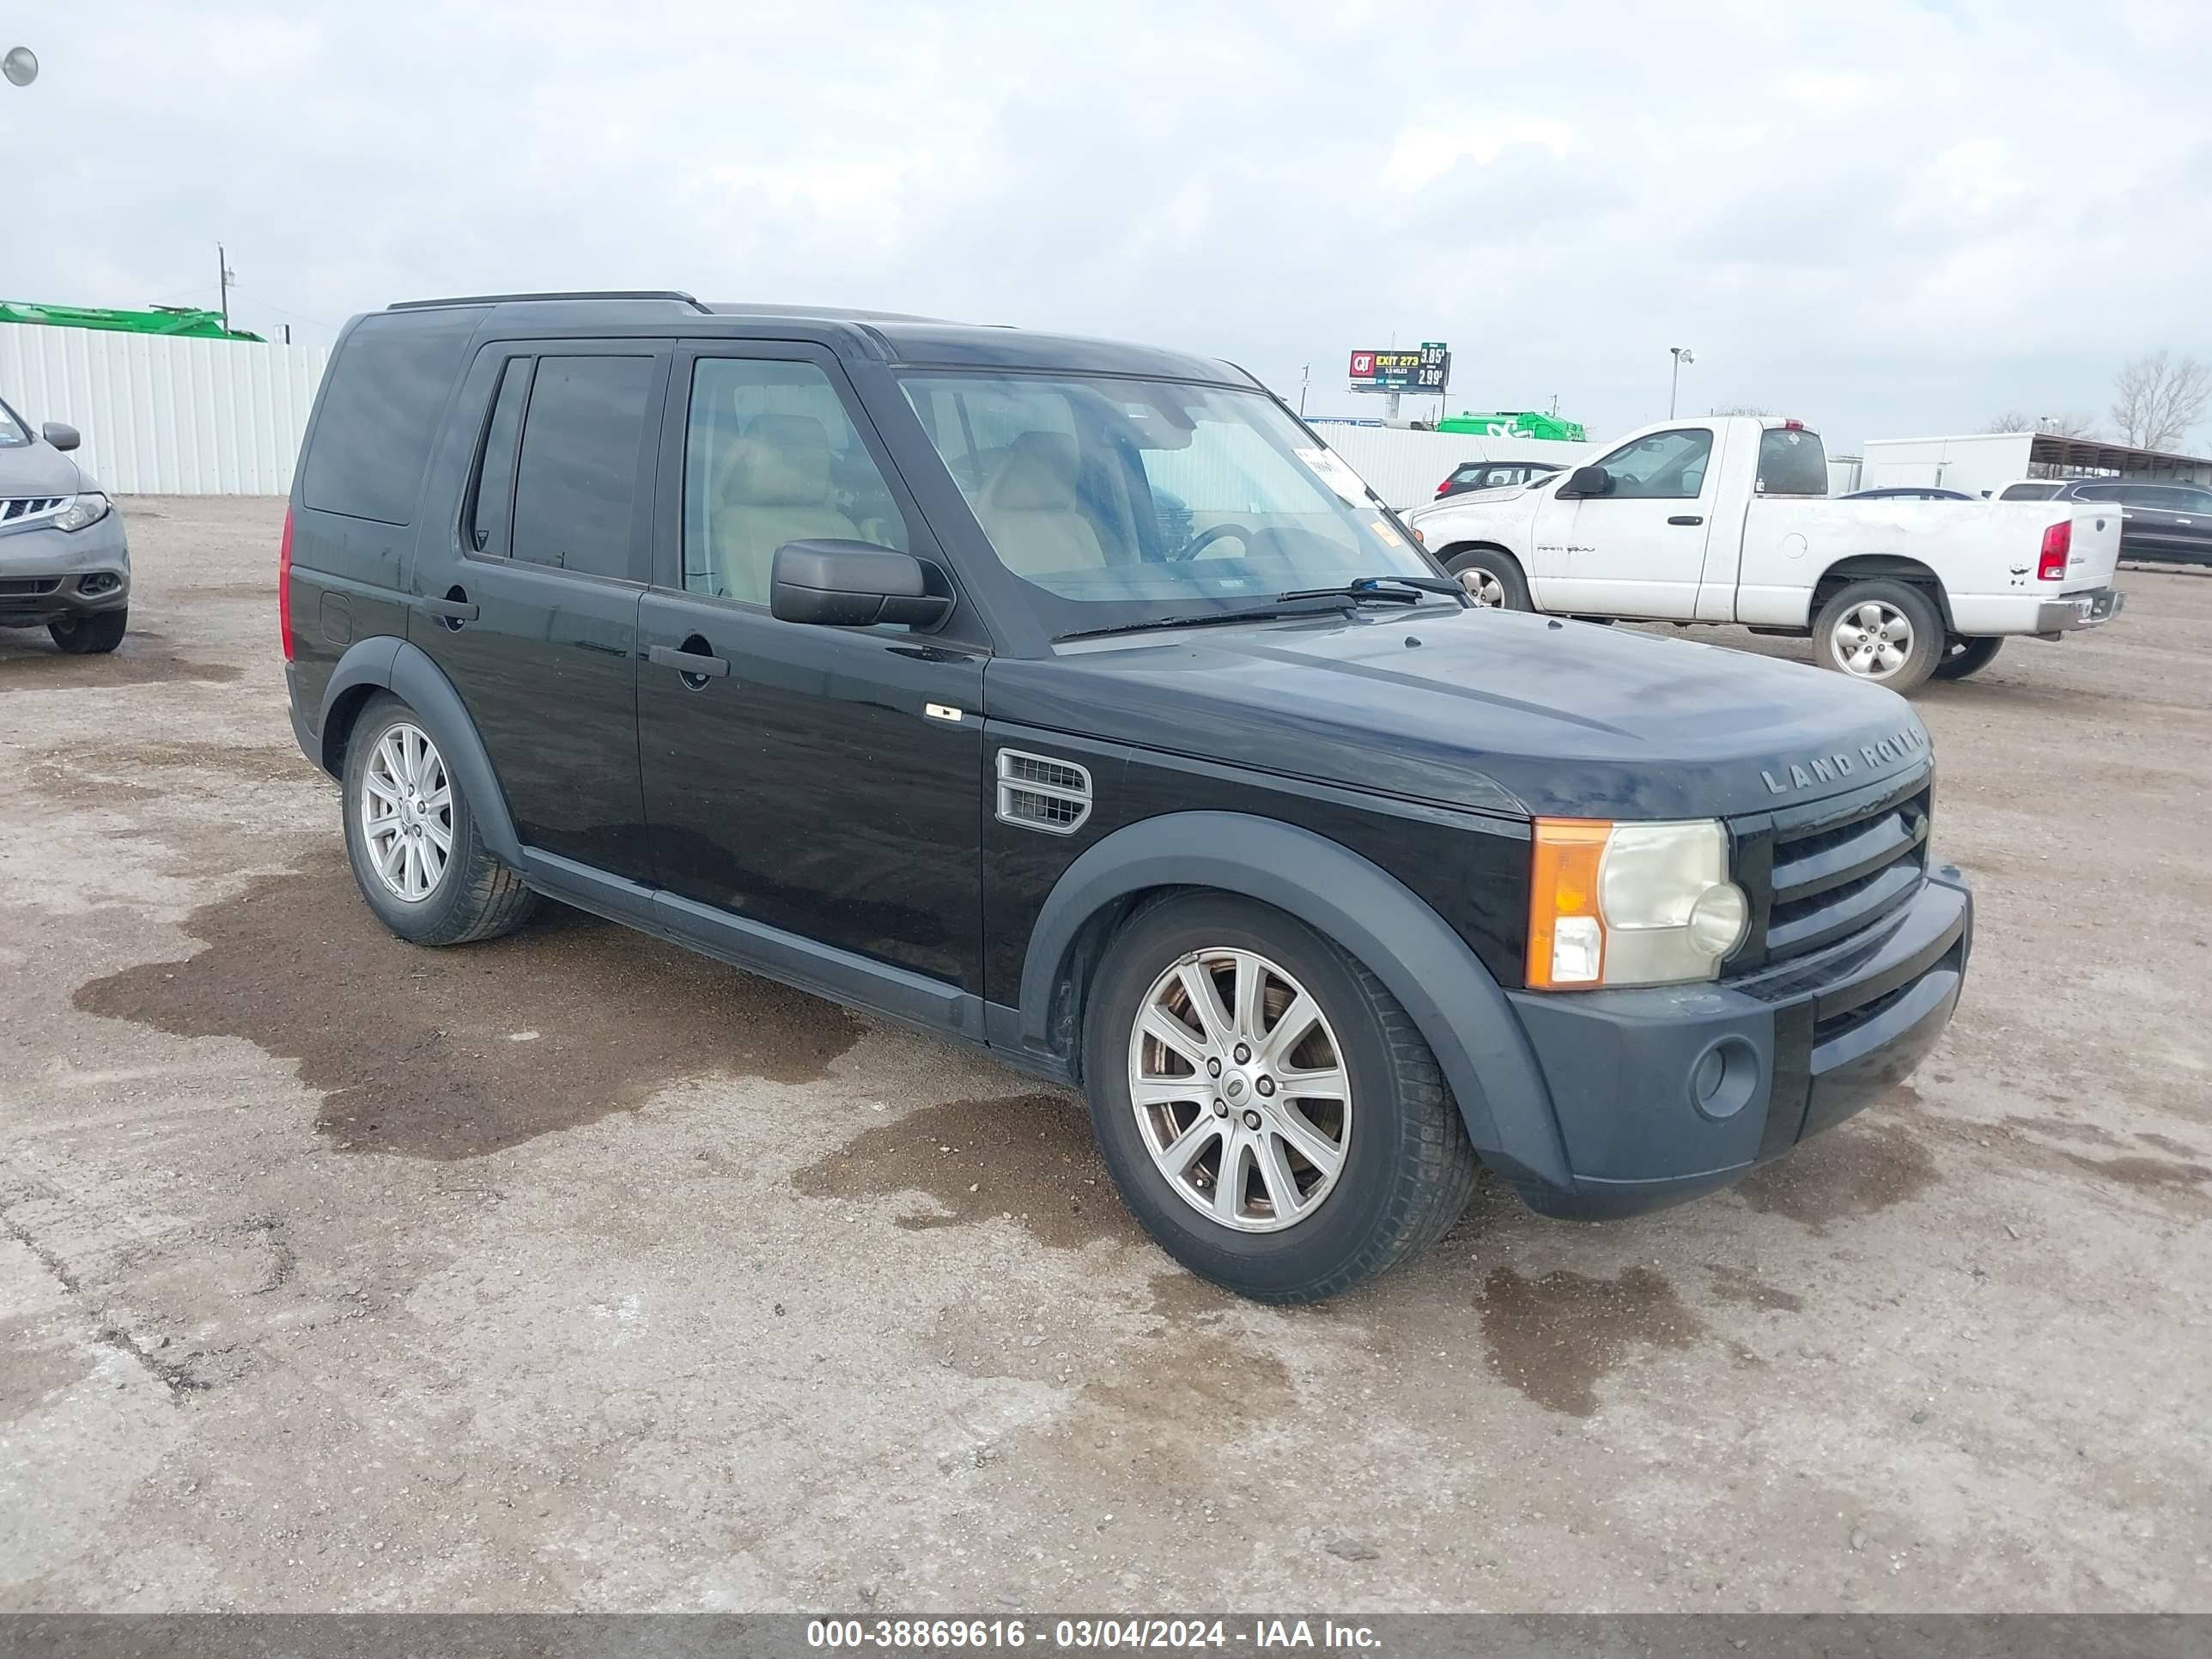 vin: SALAE25408A444345 SALAE25408A444345 2008 land rover lr3 4400 for Sale in 75172, 204 Mars Rd, Wilmer, Texas, USA